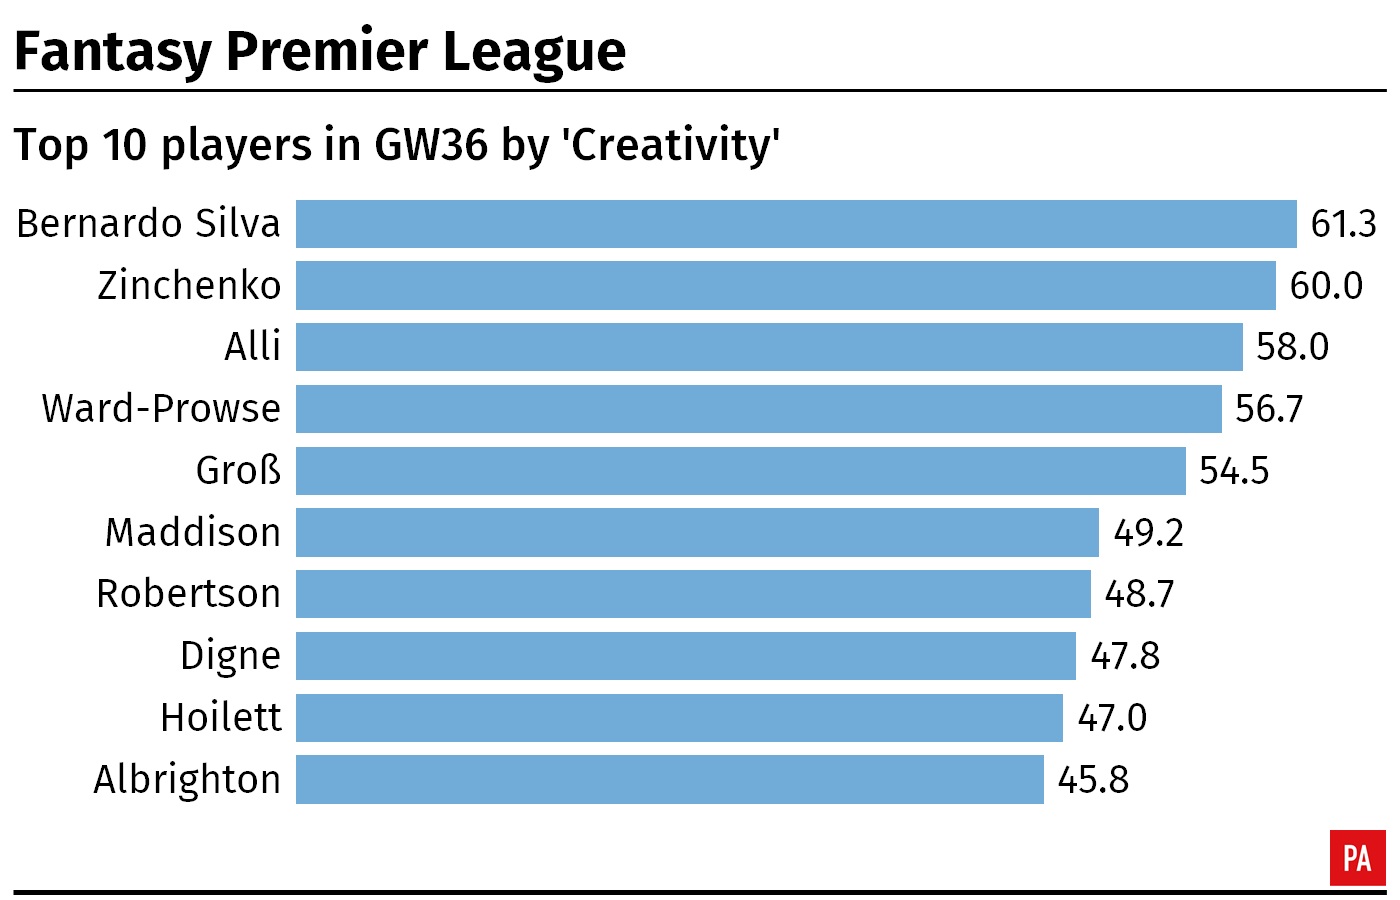 A table showing the top 10 FPL 'Creativity' scores from Premier League players in gameweek 36